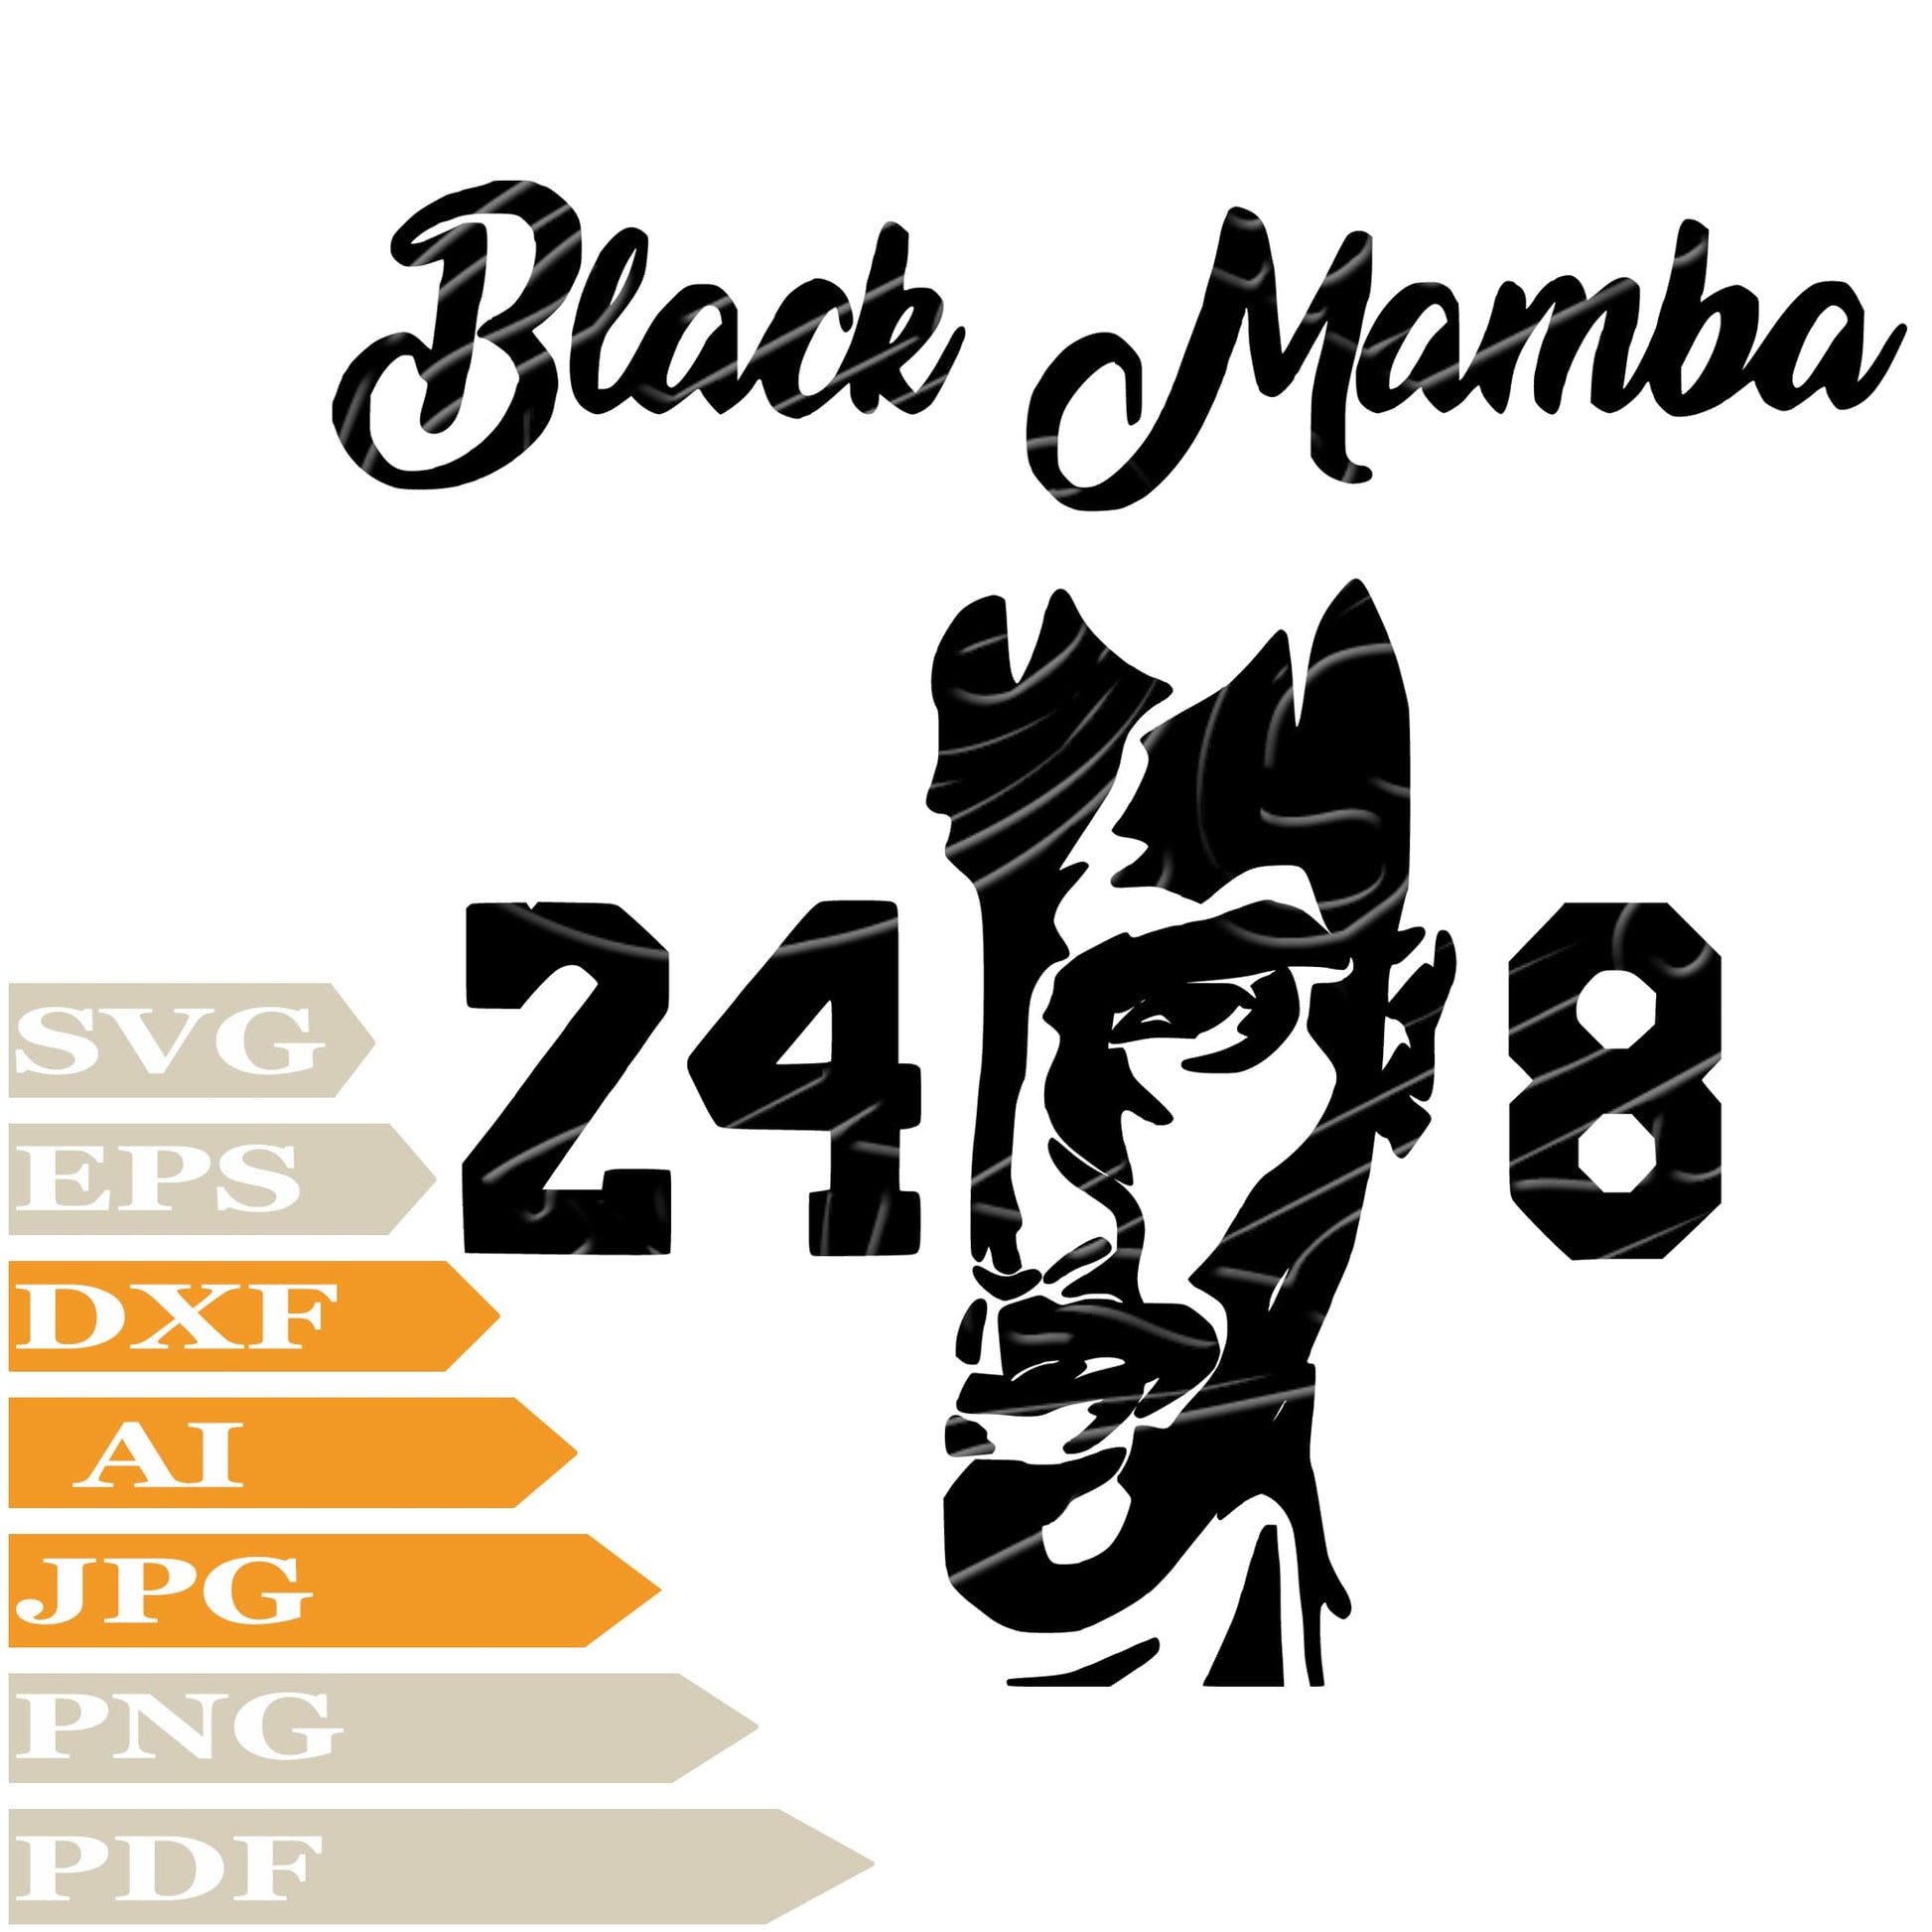 Kobe Bryant, Black Mamba Svg File, Image Cut, Png, For Tattoo, Silhouette, Digital Vector Download, Cut File, Clipart, For Cricut